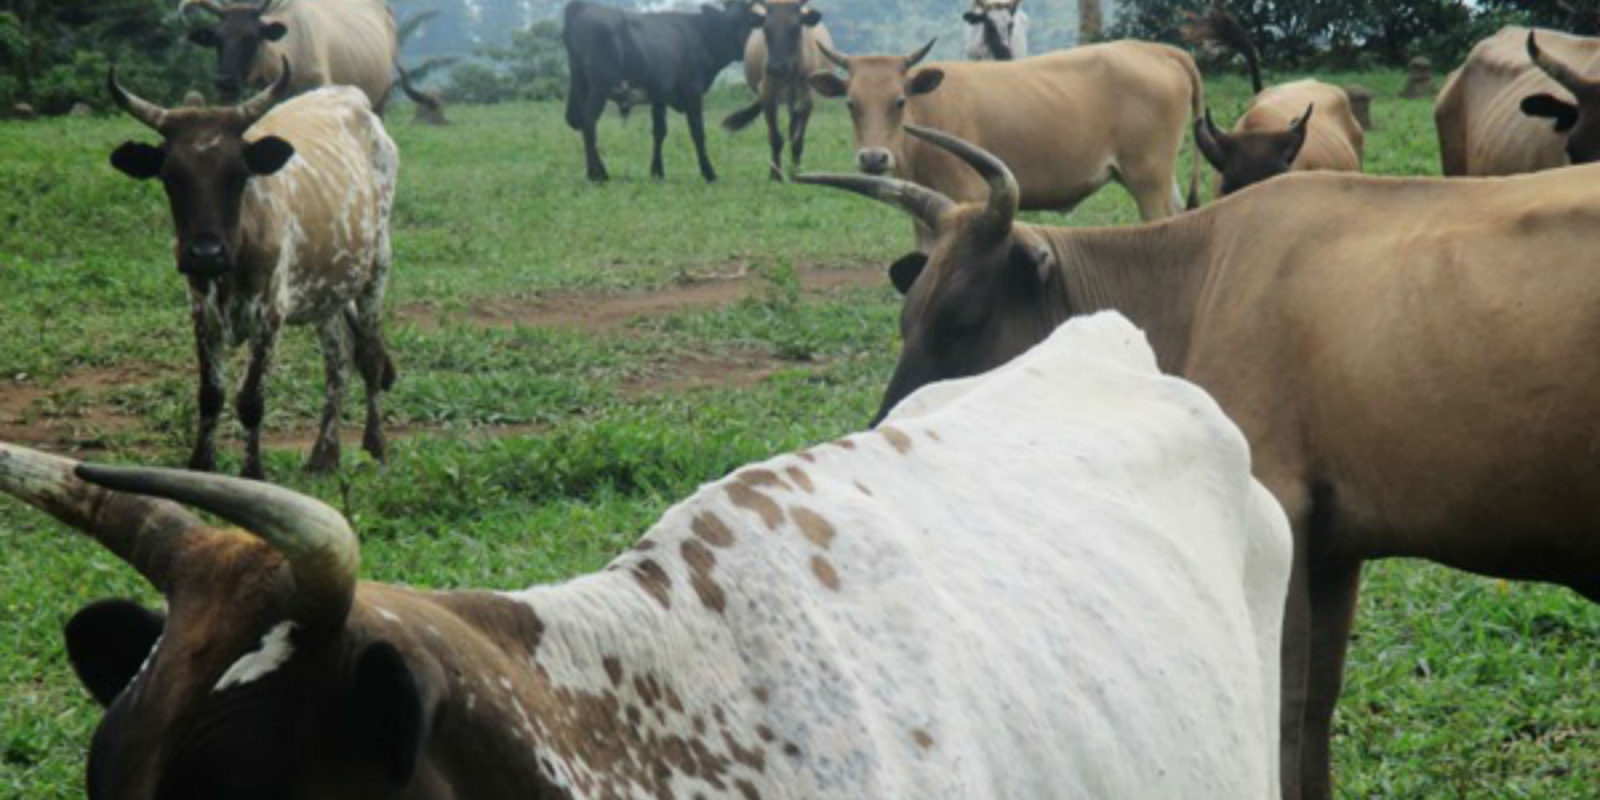 In Liberia there is around 1.6 million livestock, but barely any veterinary care staff.